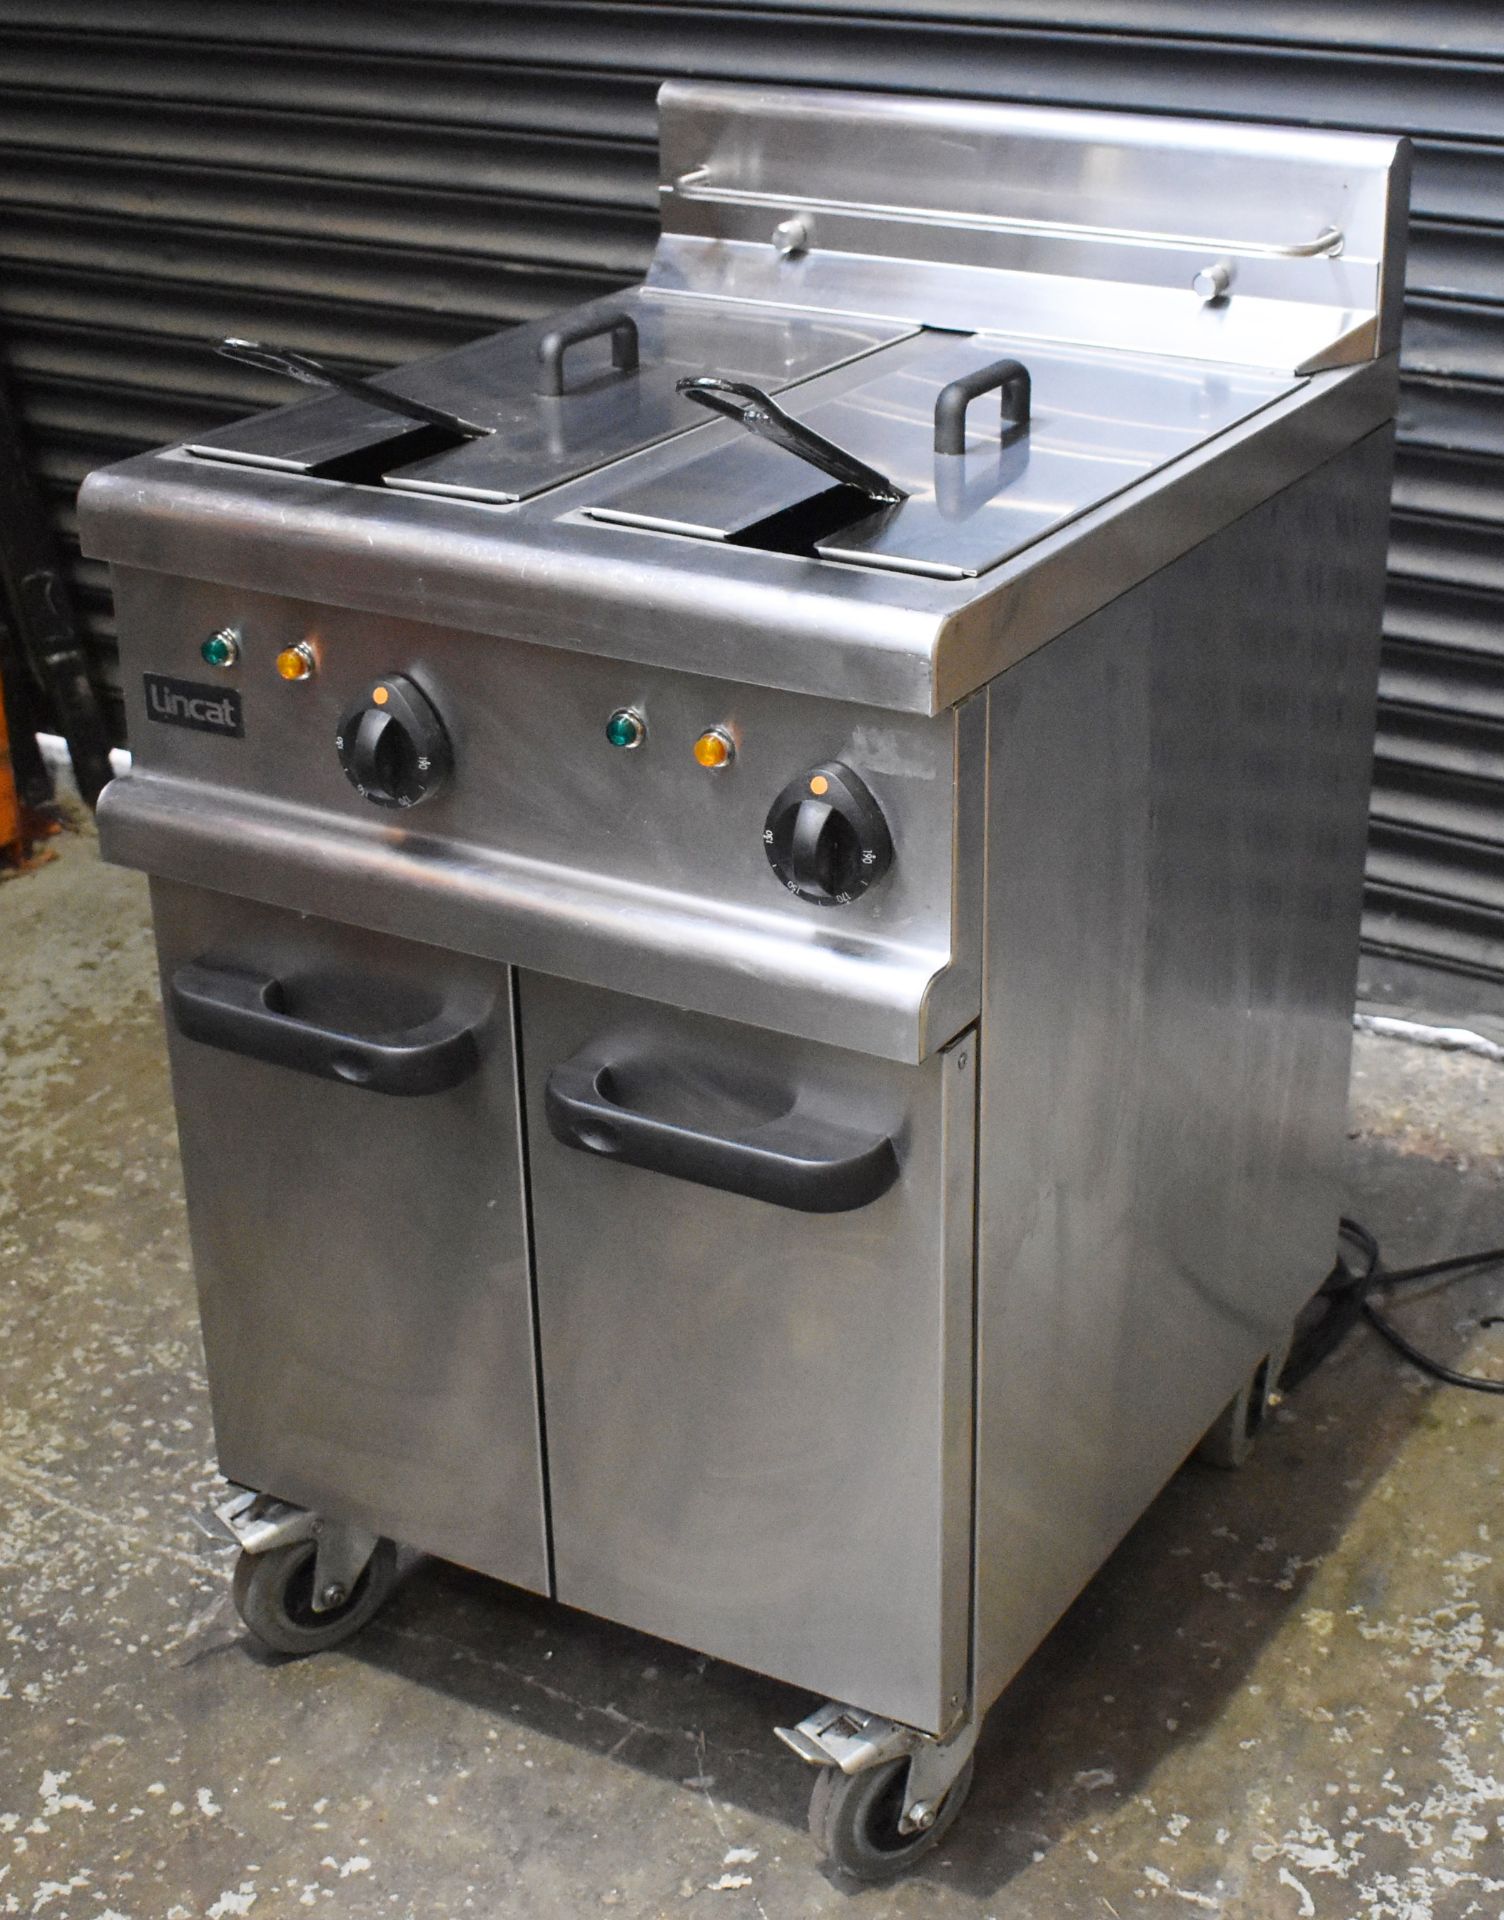 1 x Lincat Opus 700 OE7113 Twin Tank Electric Fryer With Filtration - Includes Baskets - 240V / - Image 4 of 11